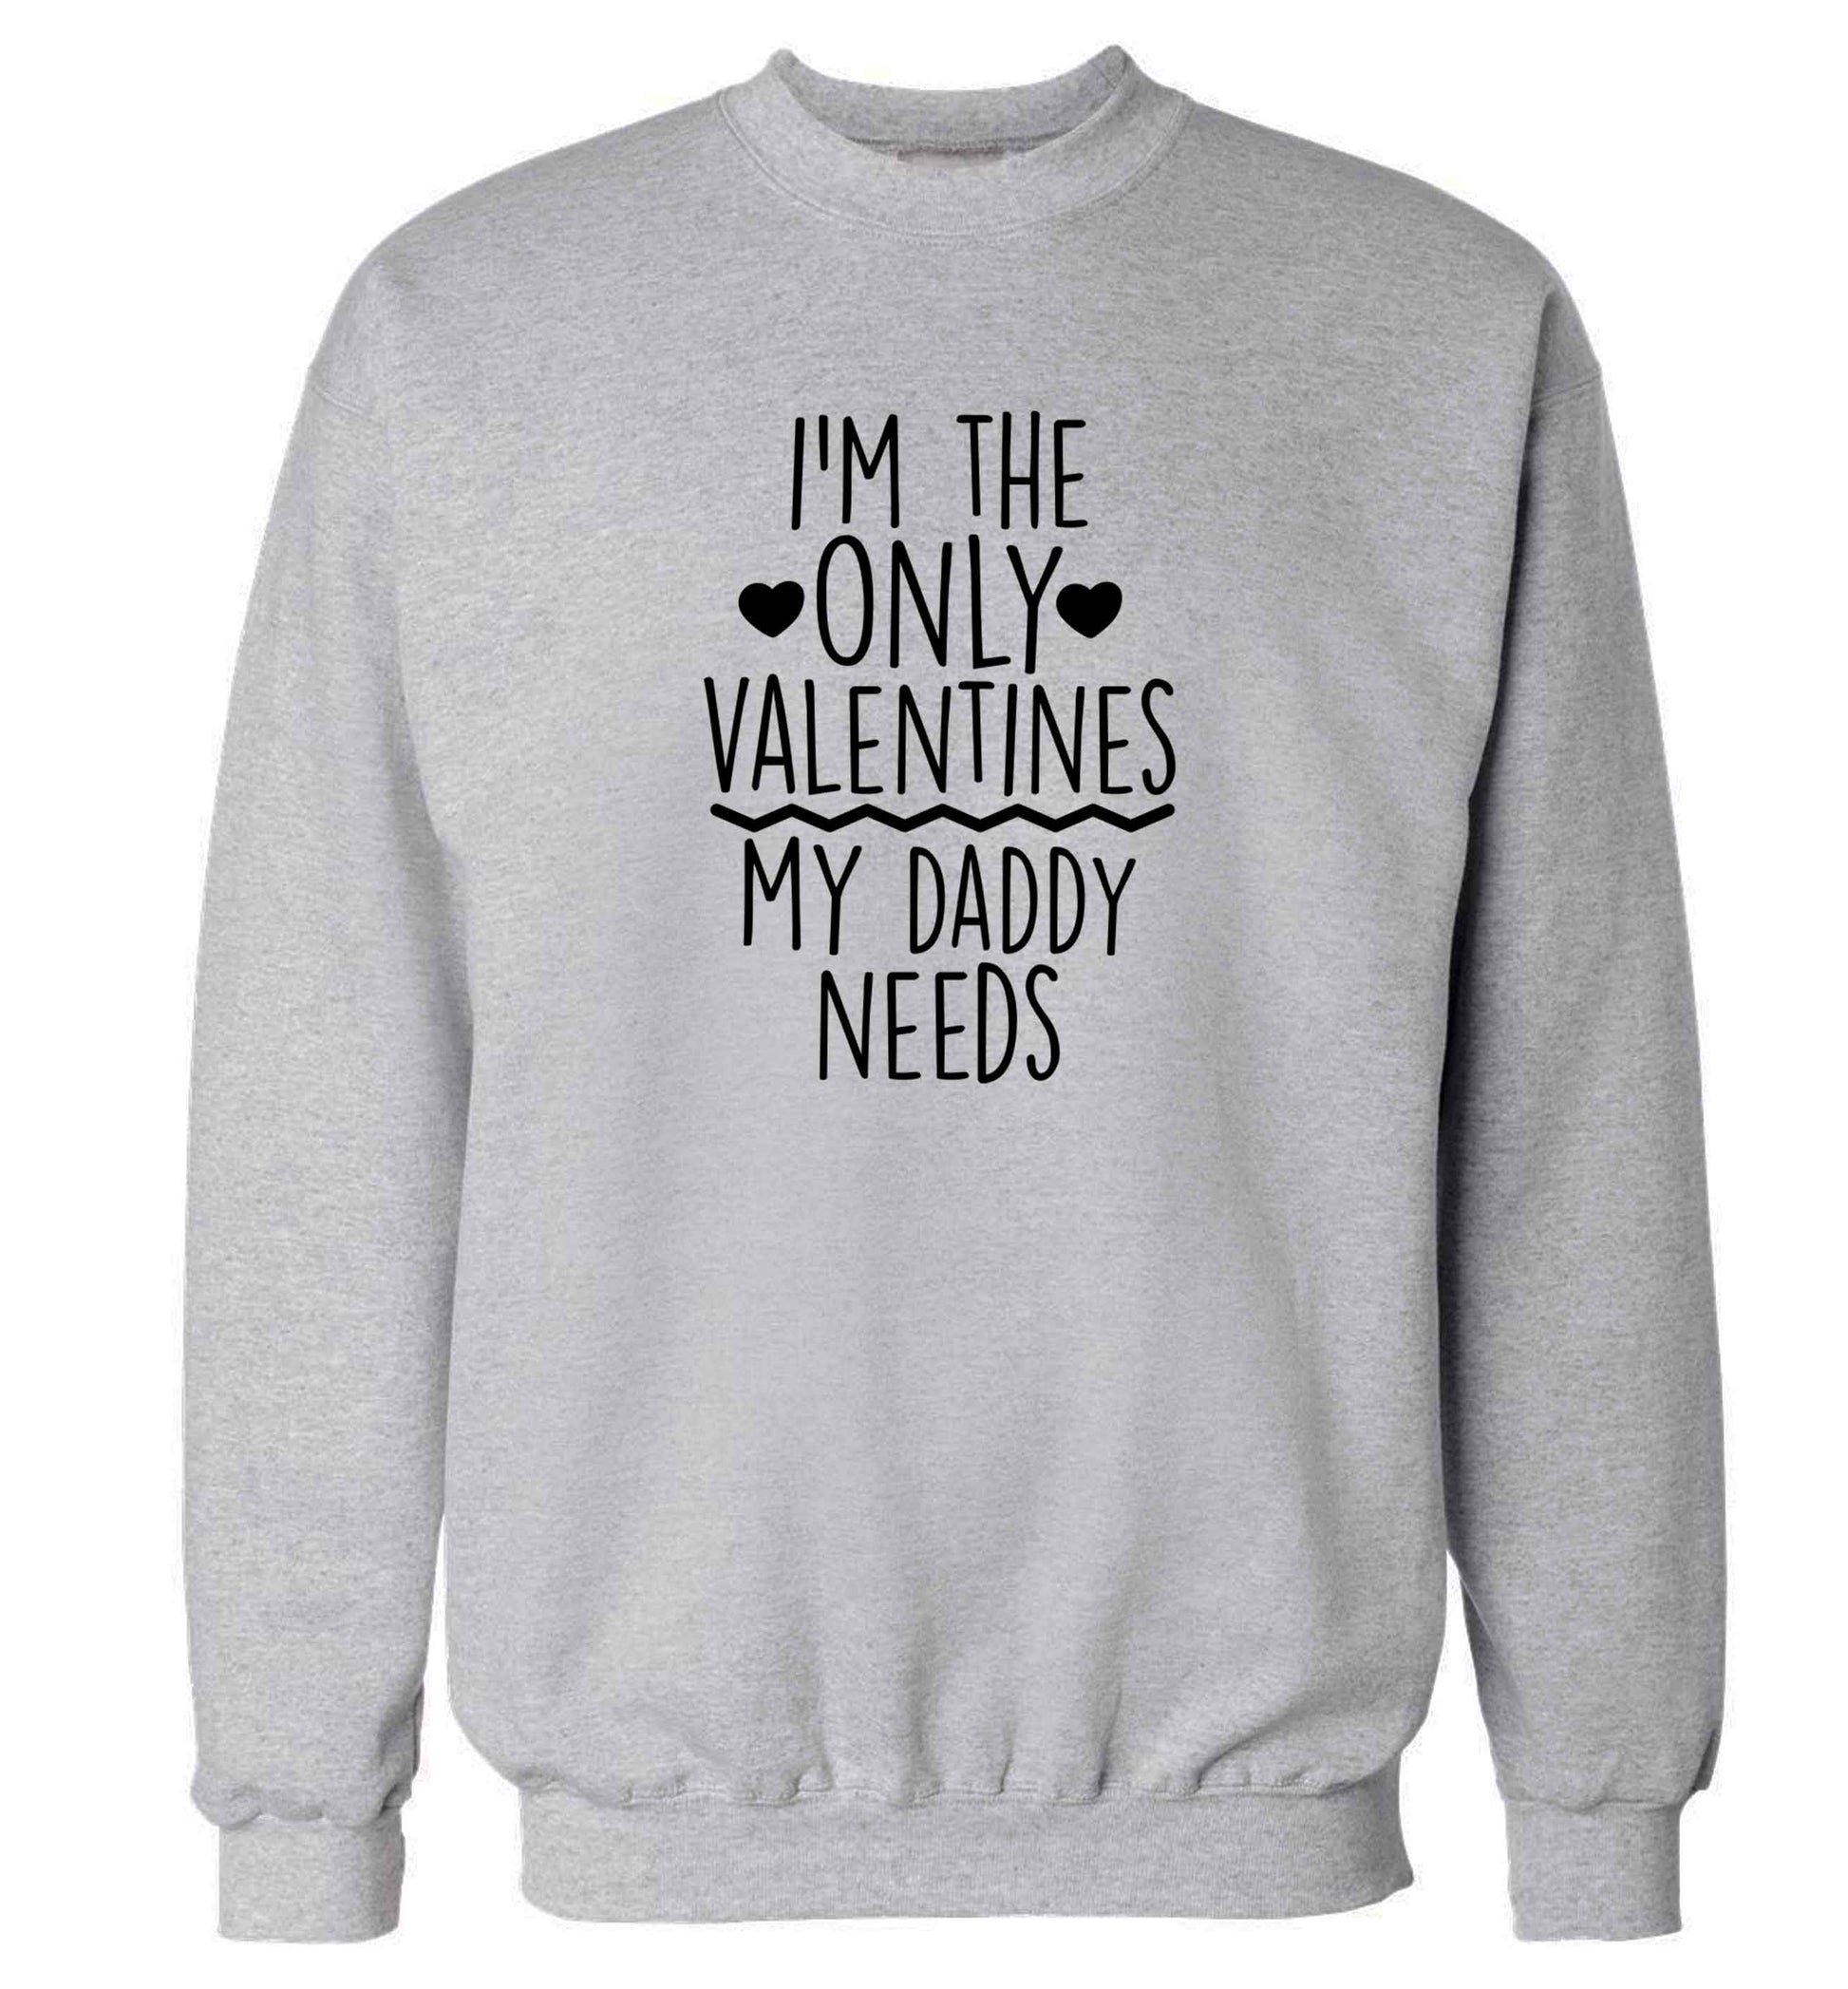 I'm the only valentines my daddy needs adult's unisex grey sweater 2XL